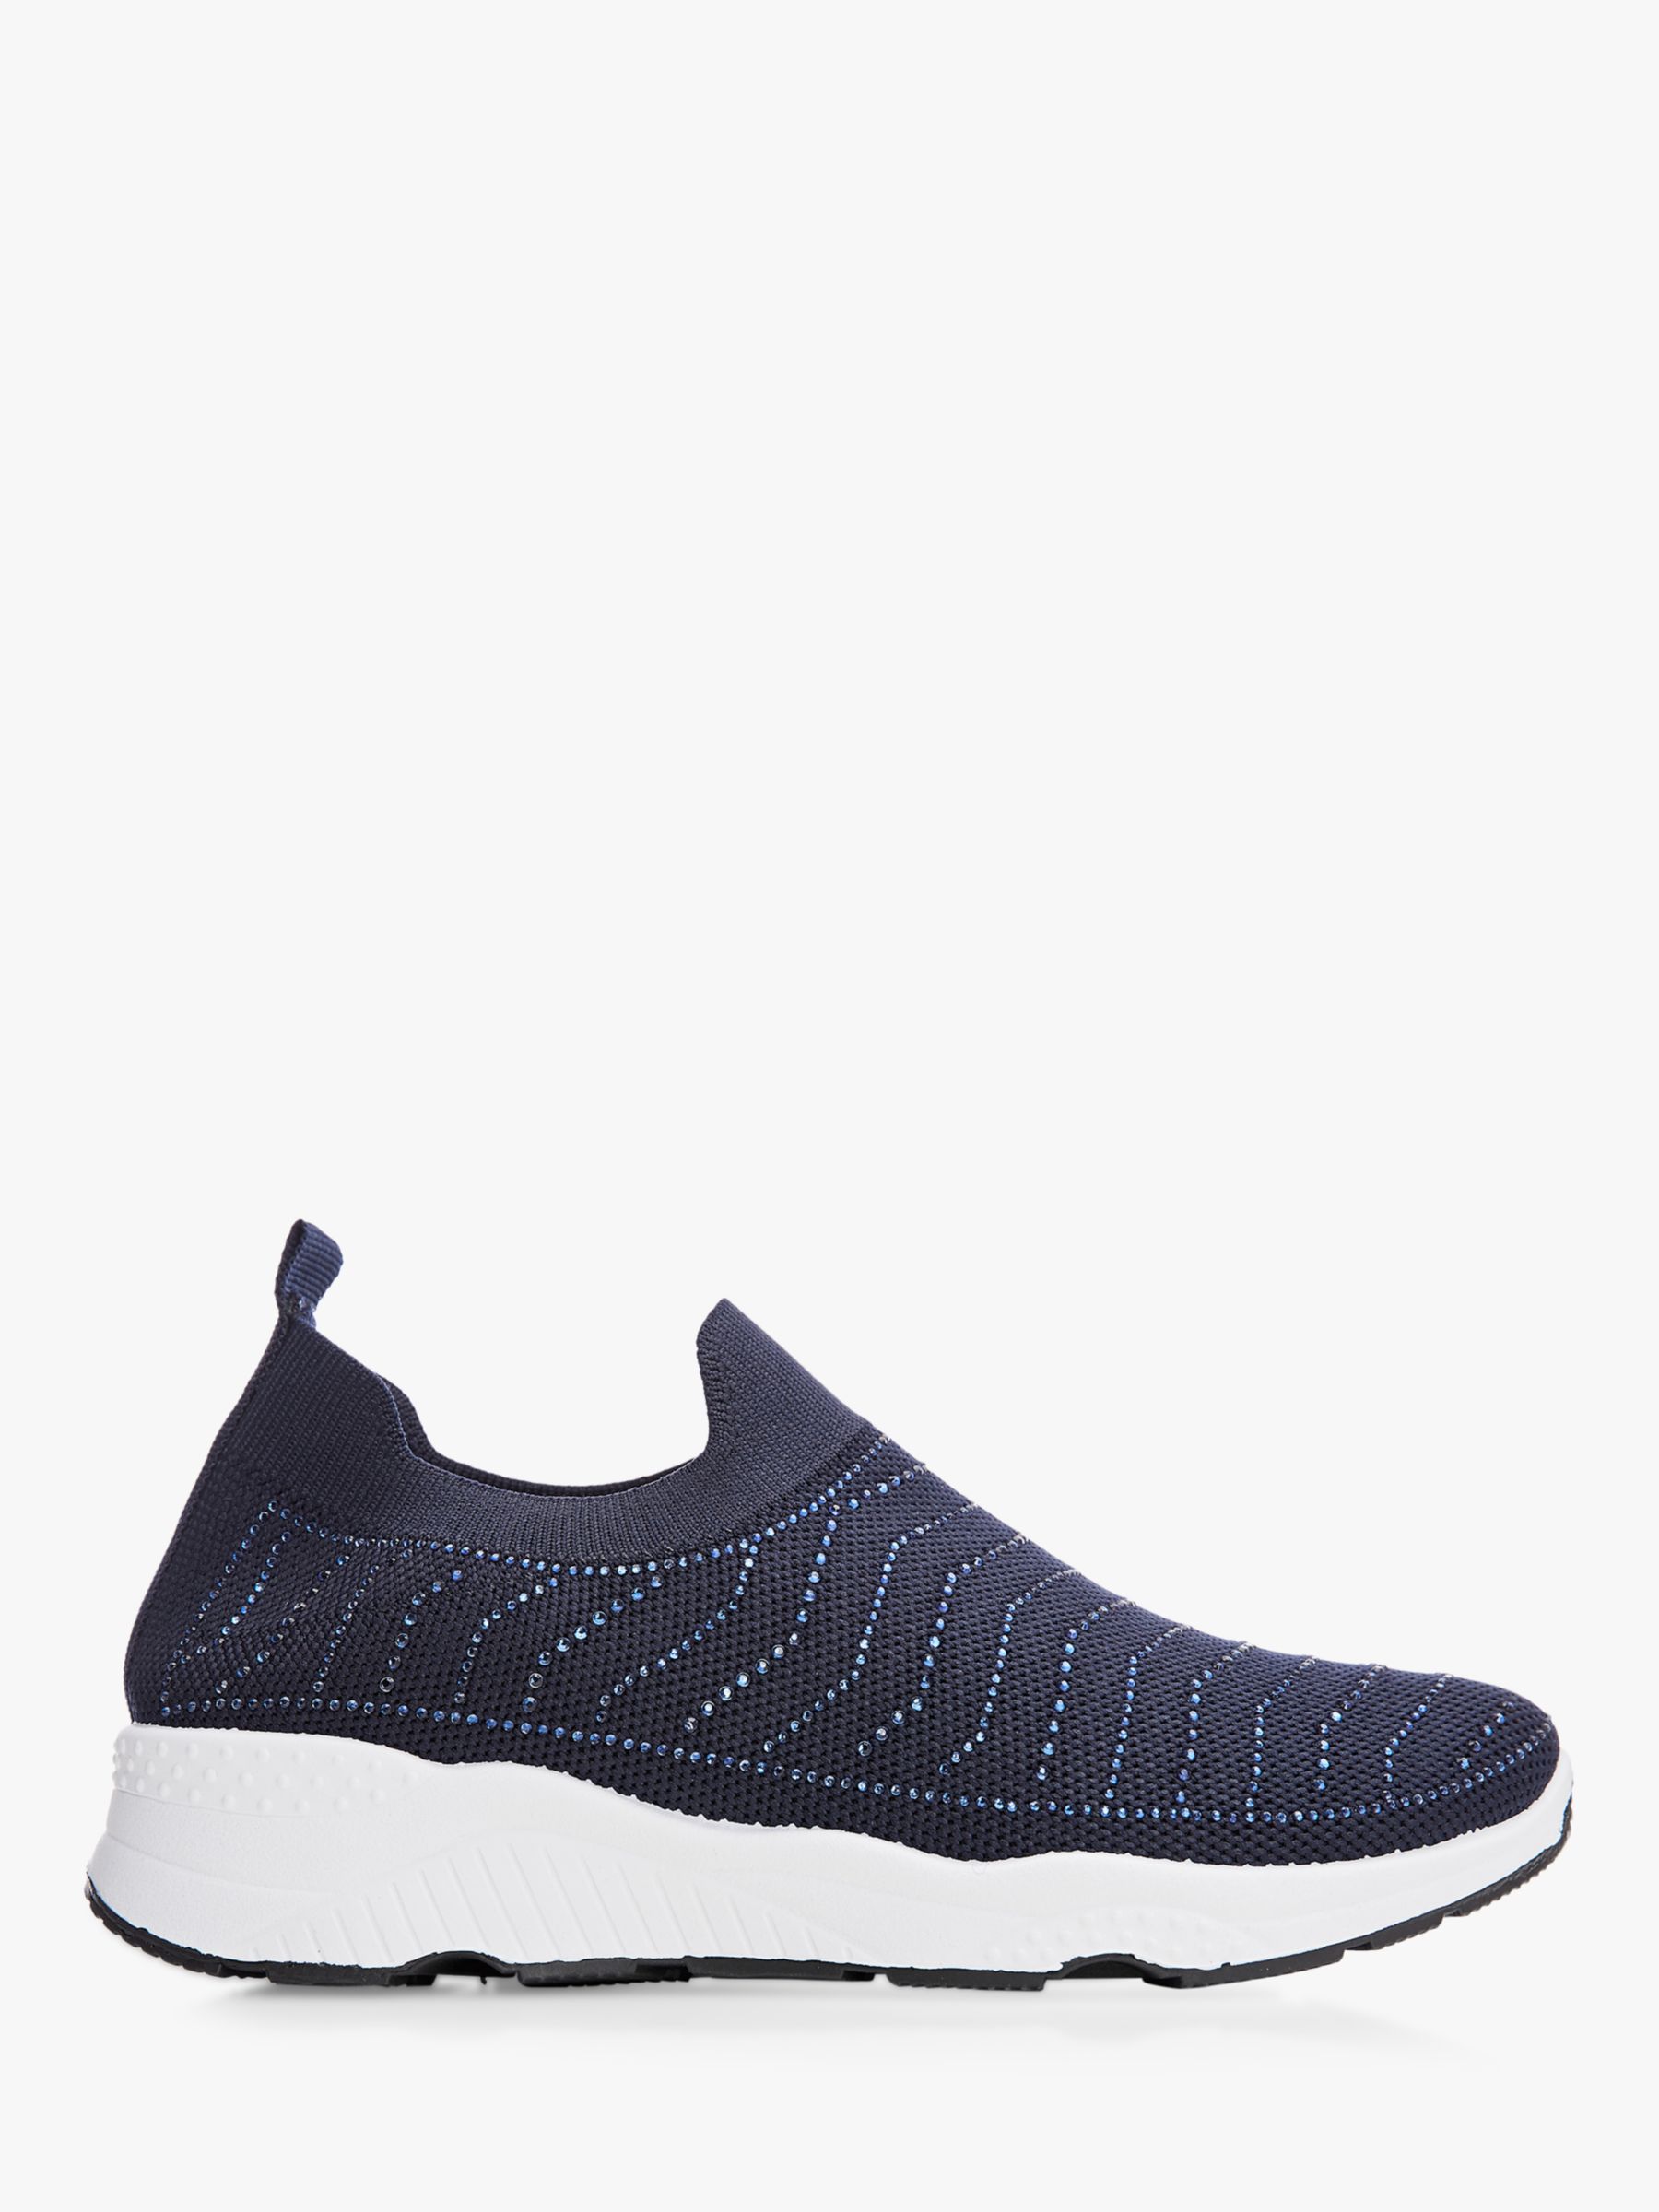 Moda in Pelle Aali Textile Slip On Trainers, Navy at John Lewis & Partners